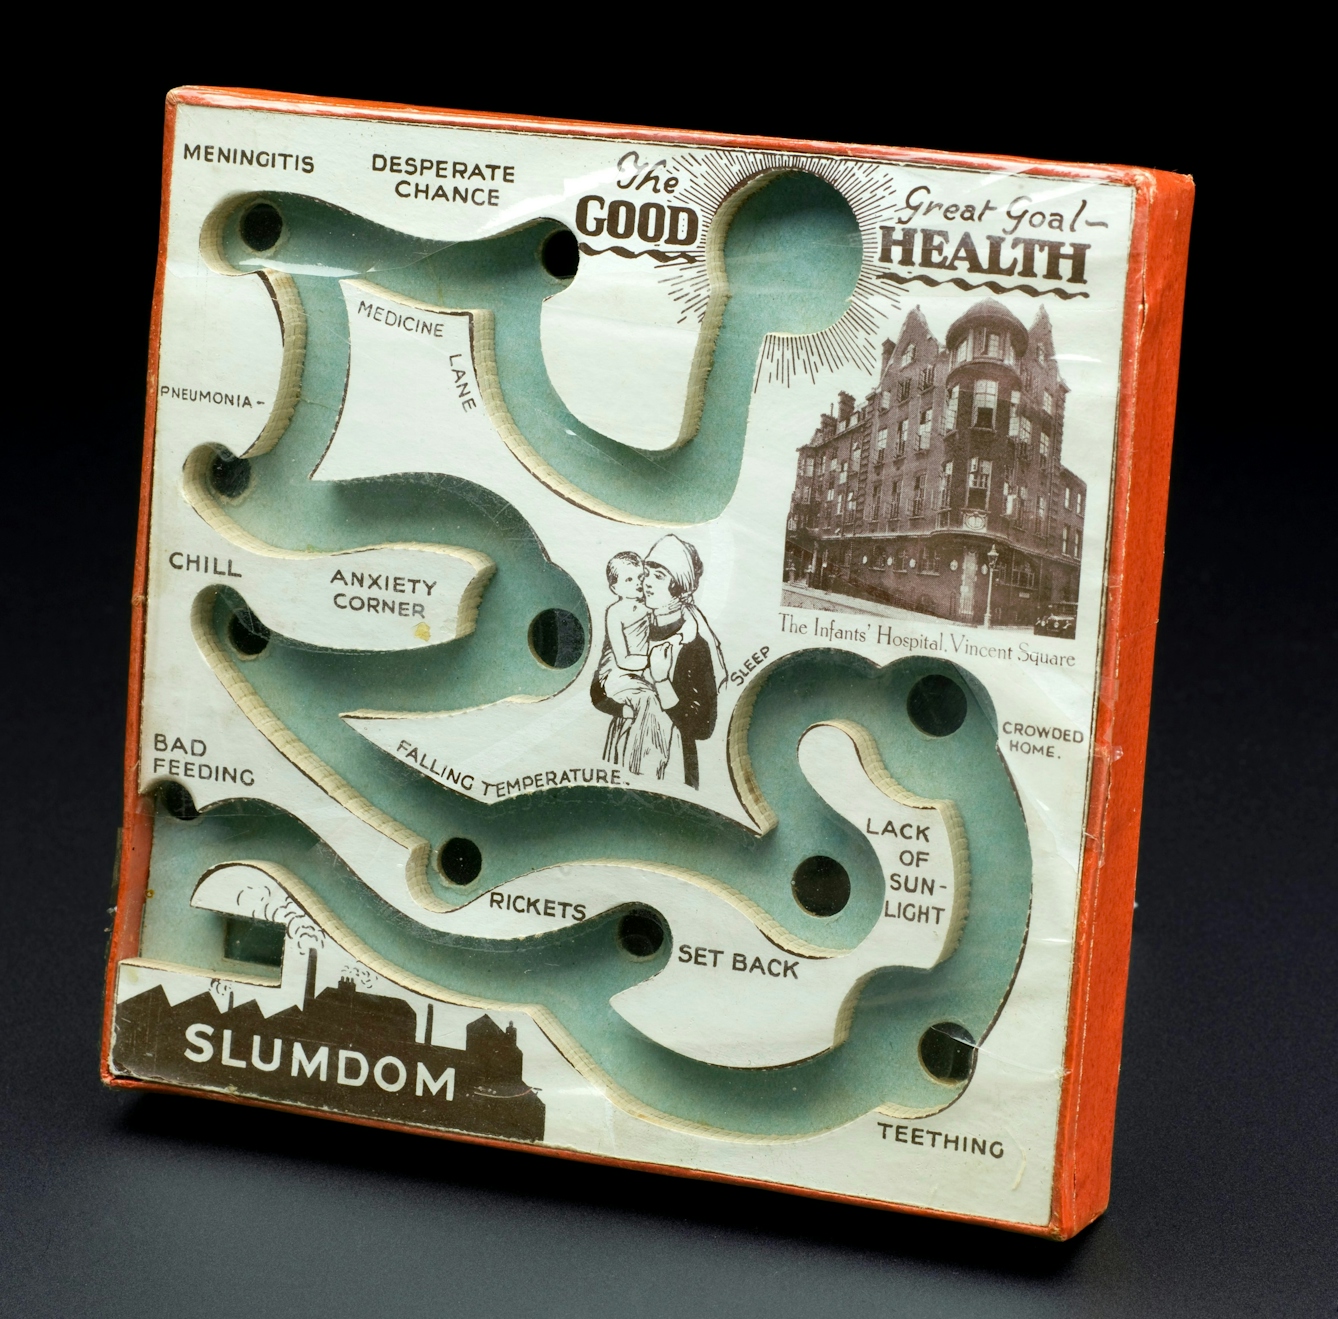 Board with a track in it and various holes for a small ball to fall into. The track begins at Slumdon and ends and "The Great Goal - Good Health".